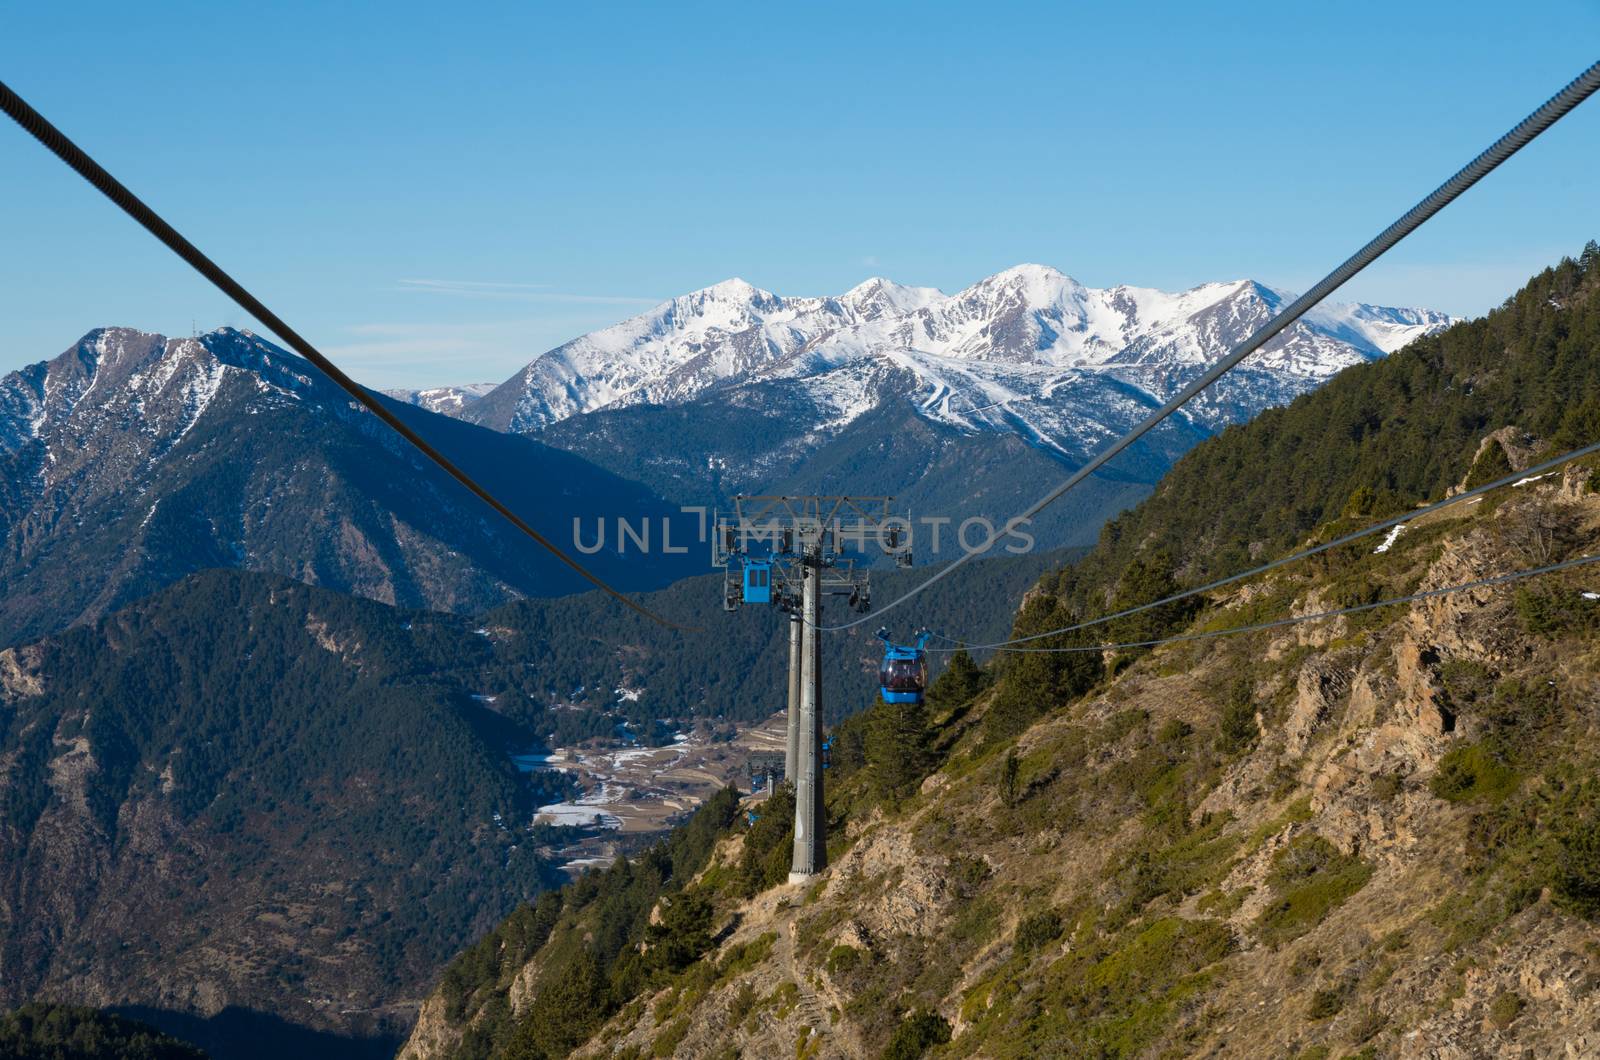 Skiing and snowboarding on the snowy slopes of prepared ski resort in Andorra